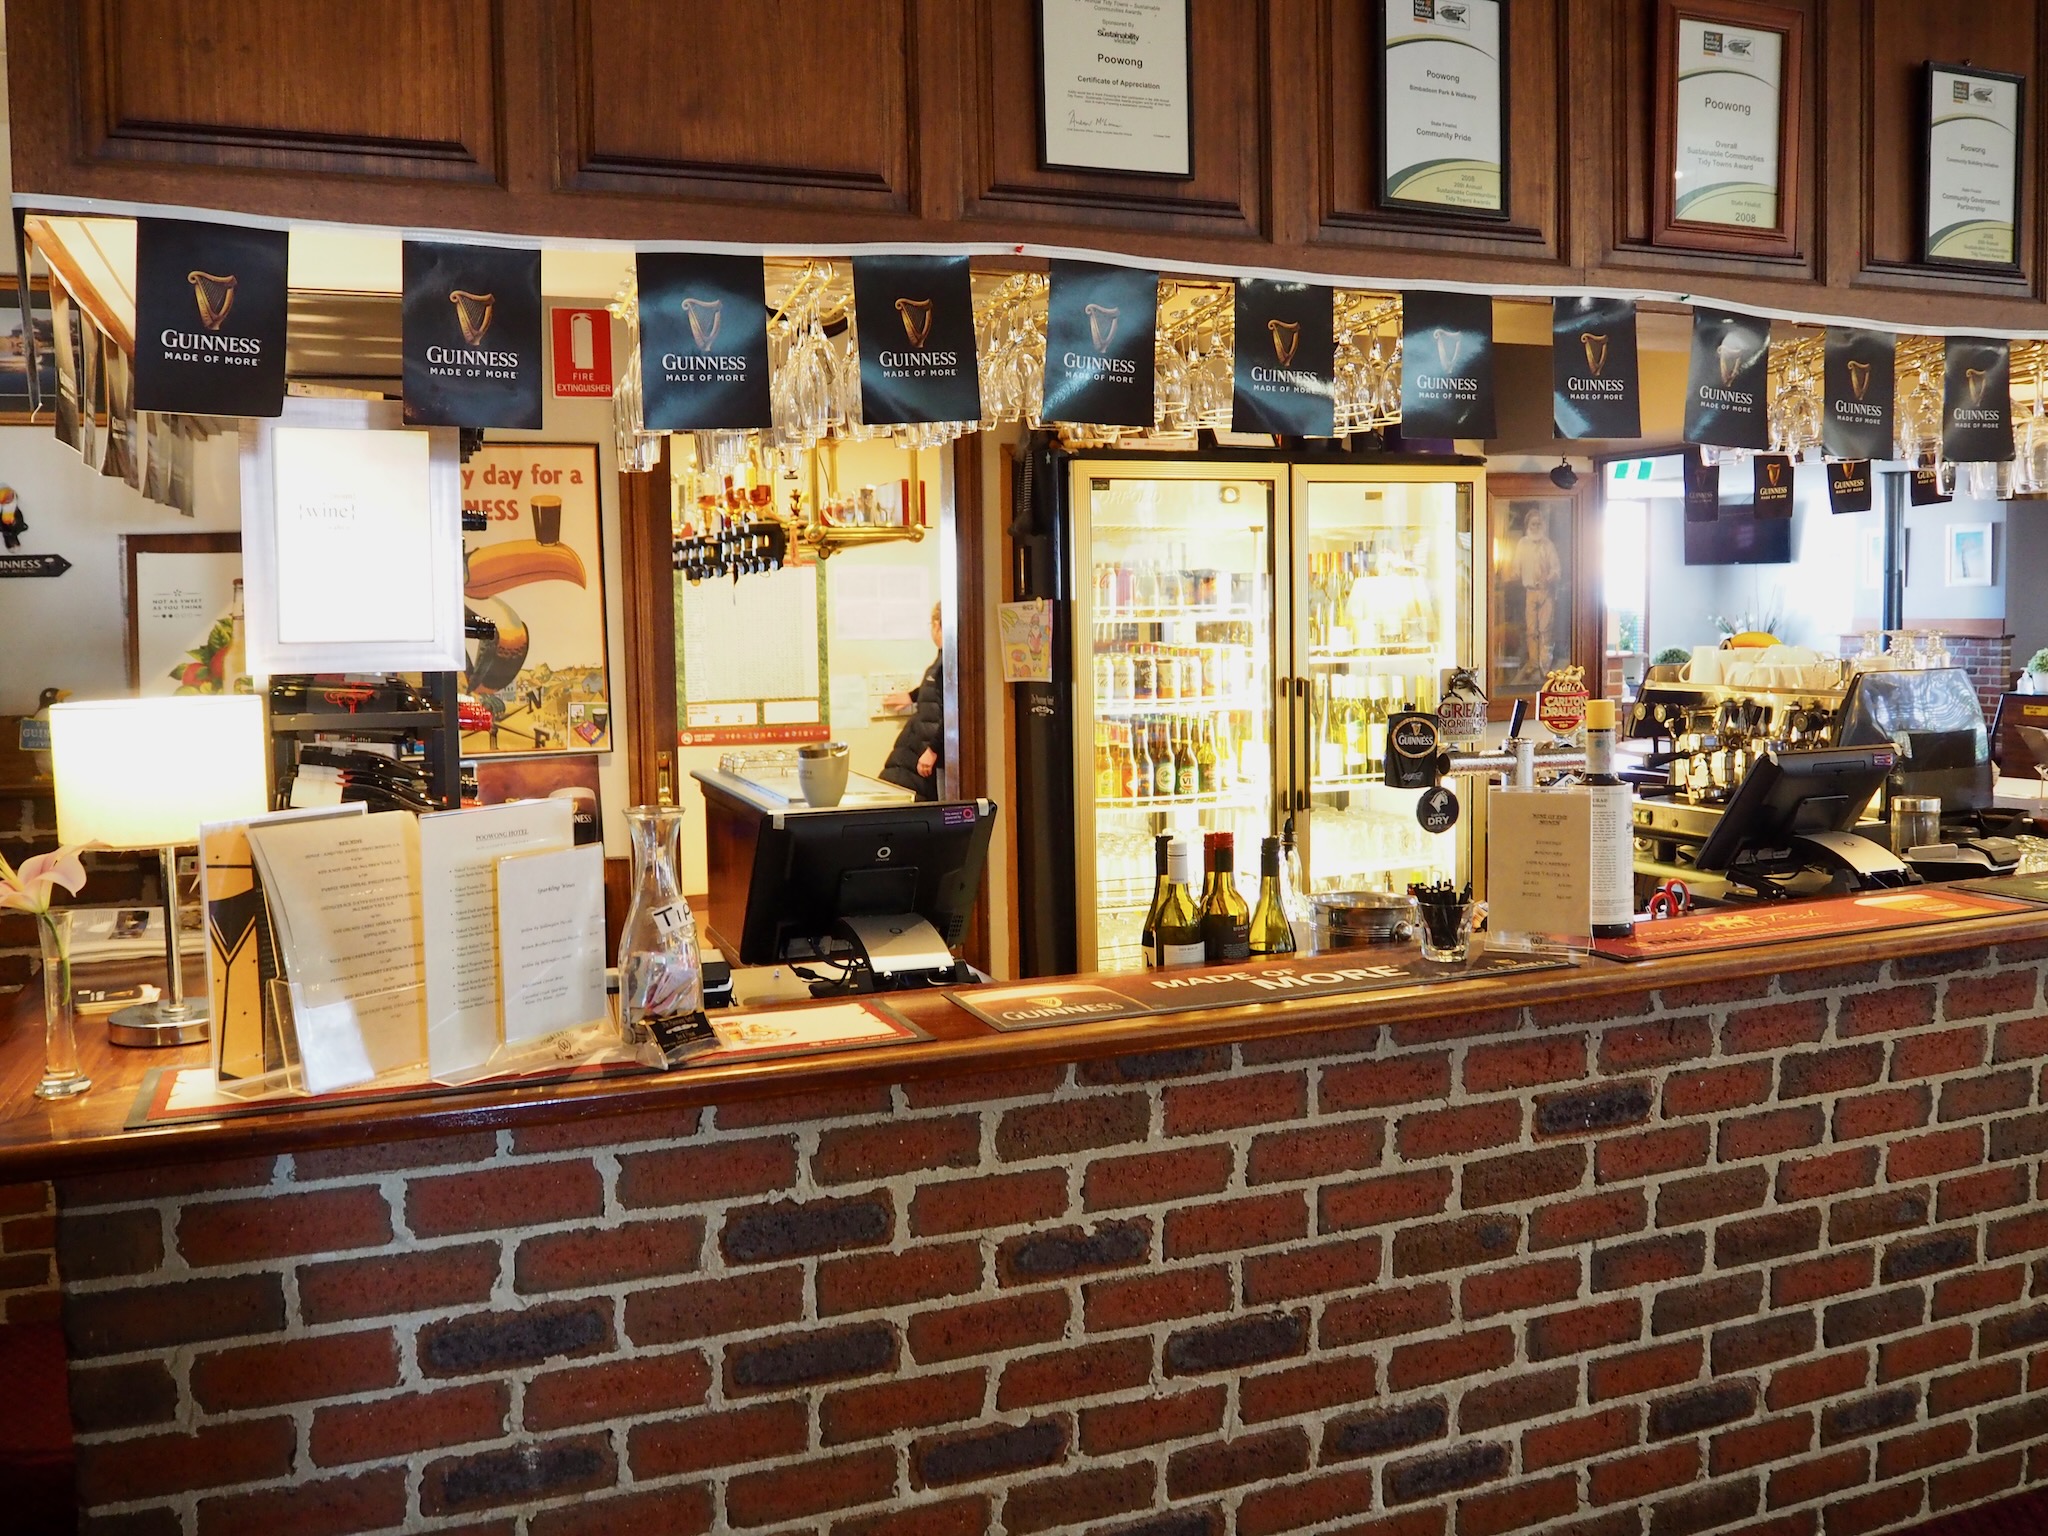 A photo of the specials board in the dining area.